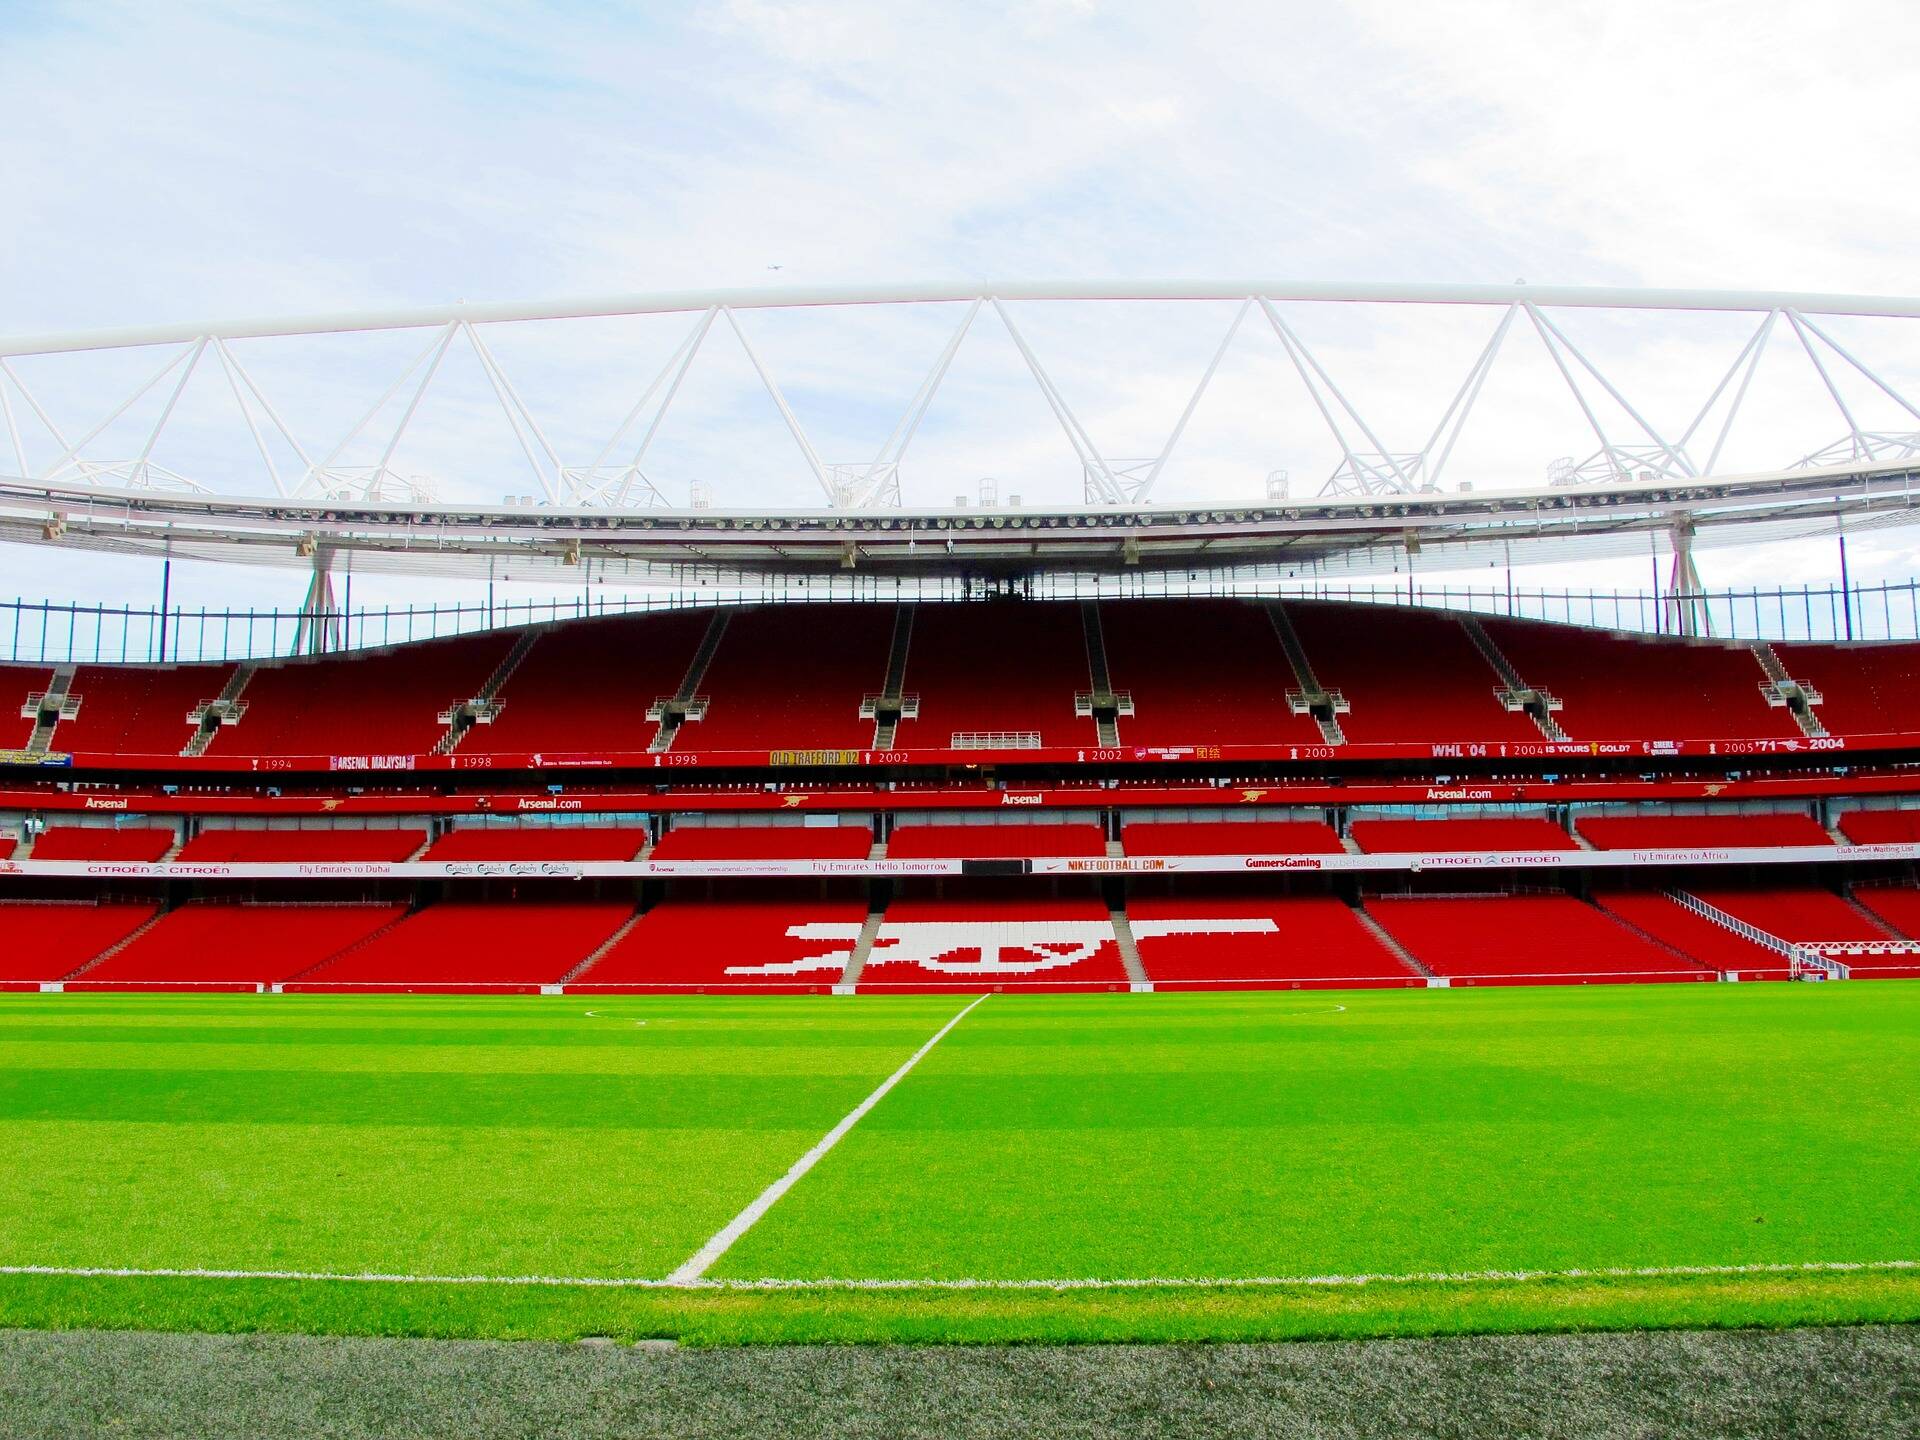 Emirates Stadium project highlights ‘real opportunity’ for flexible energy innovation